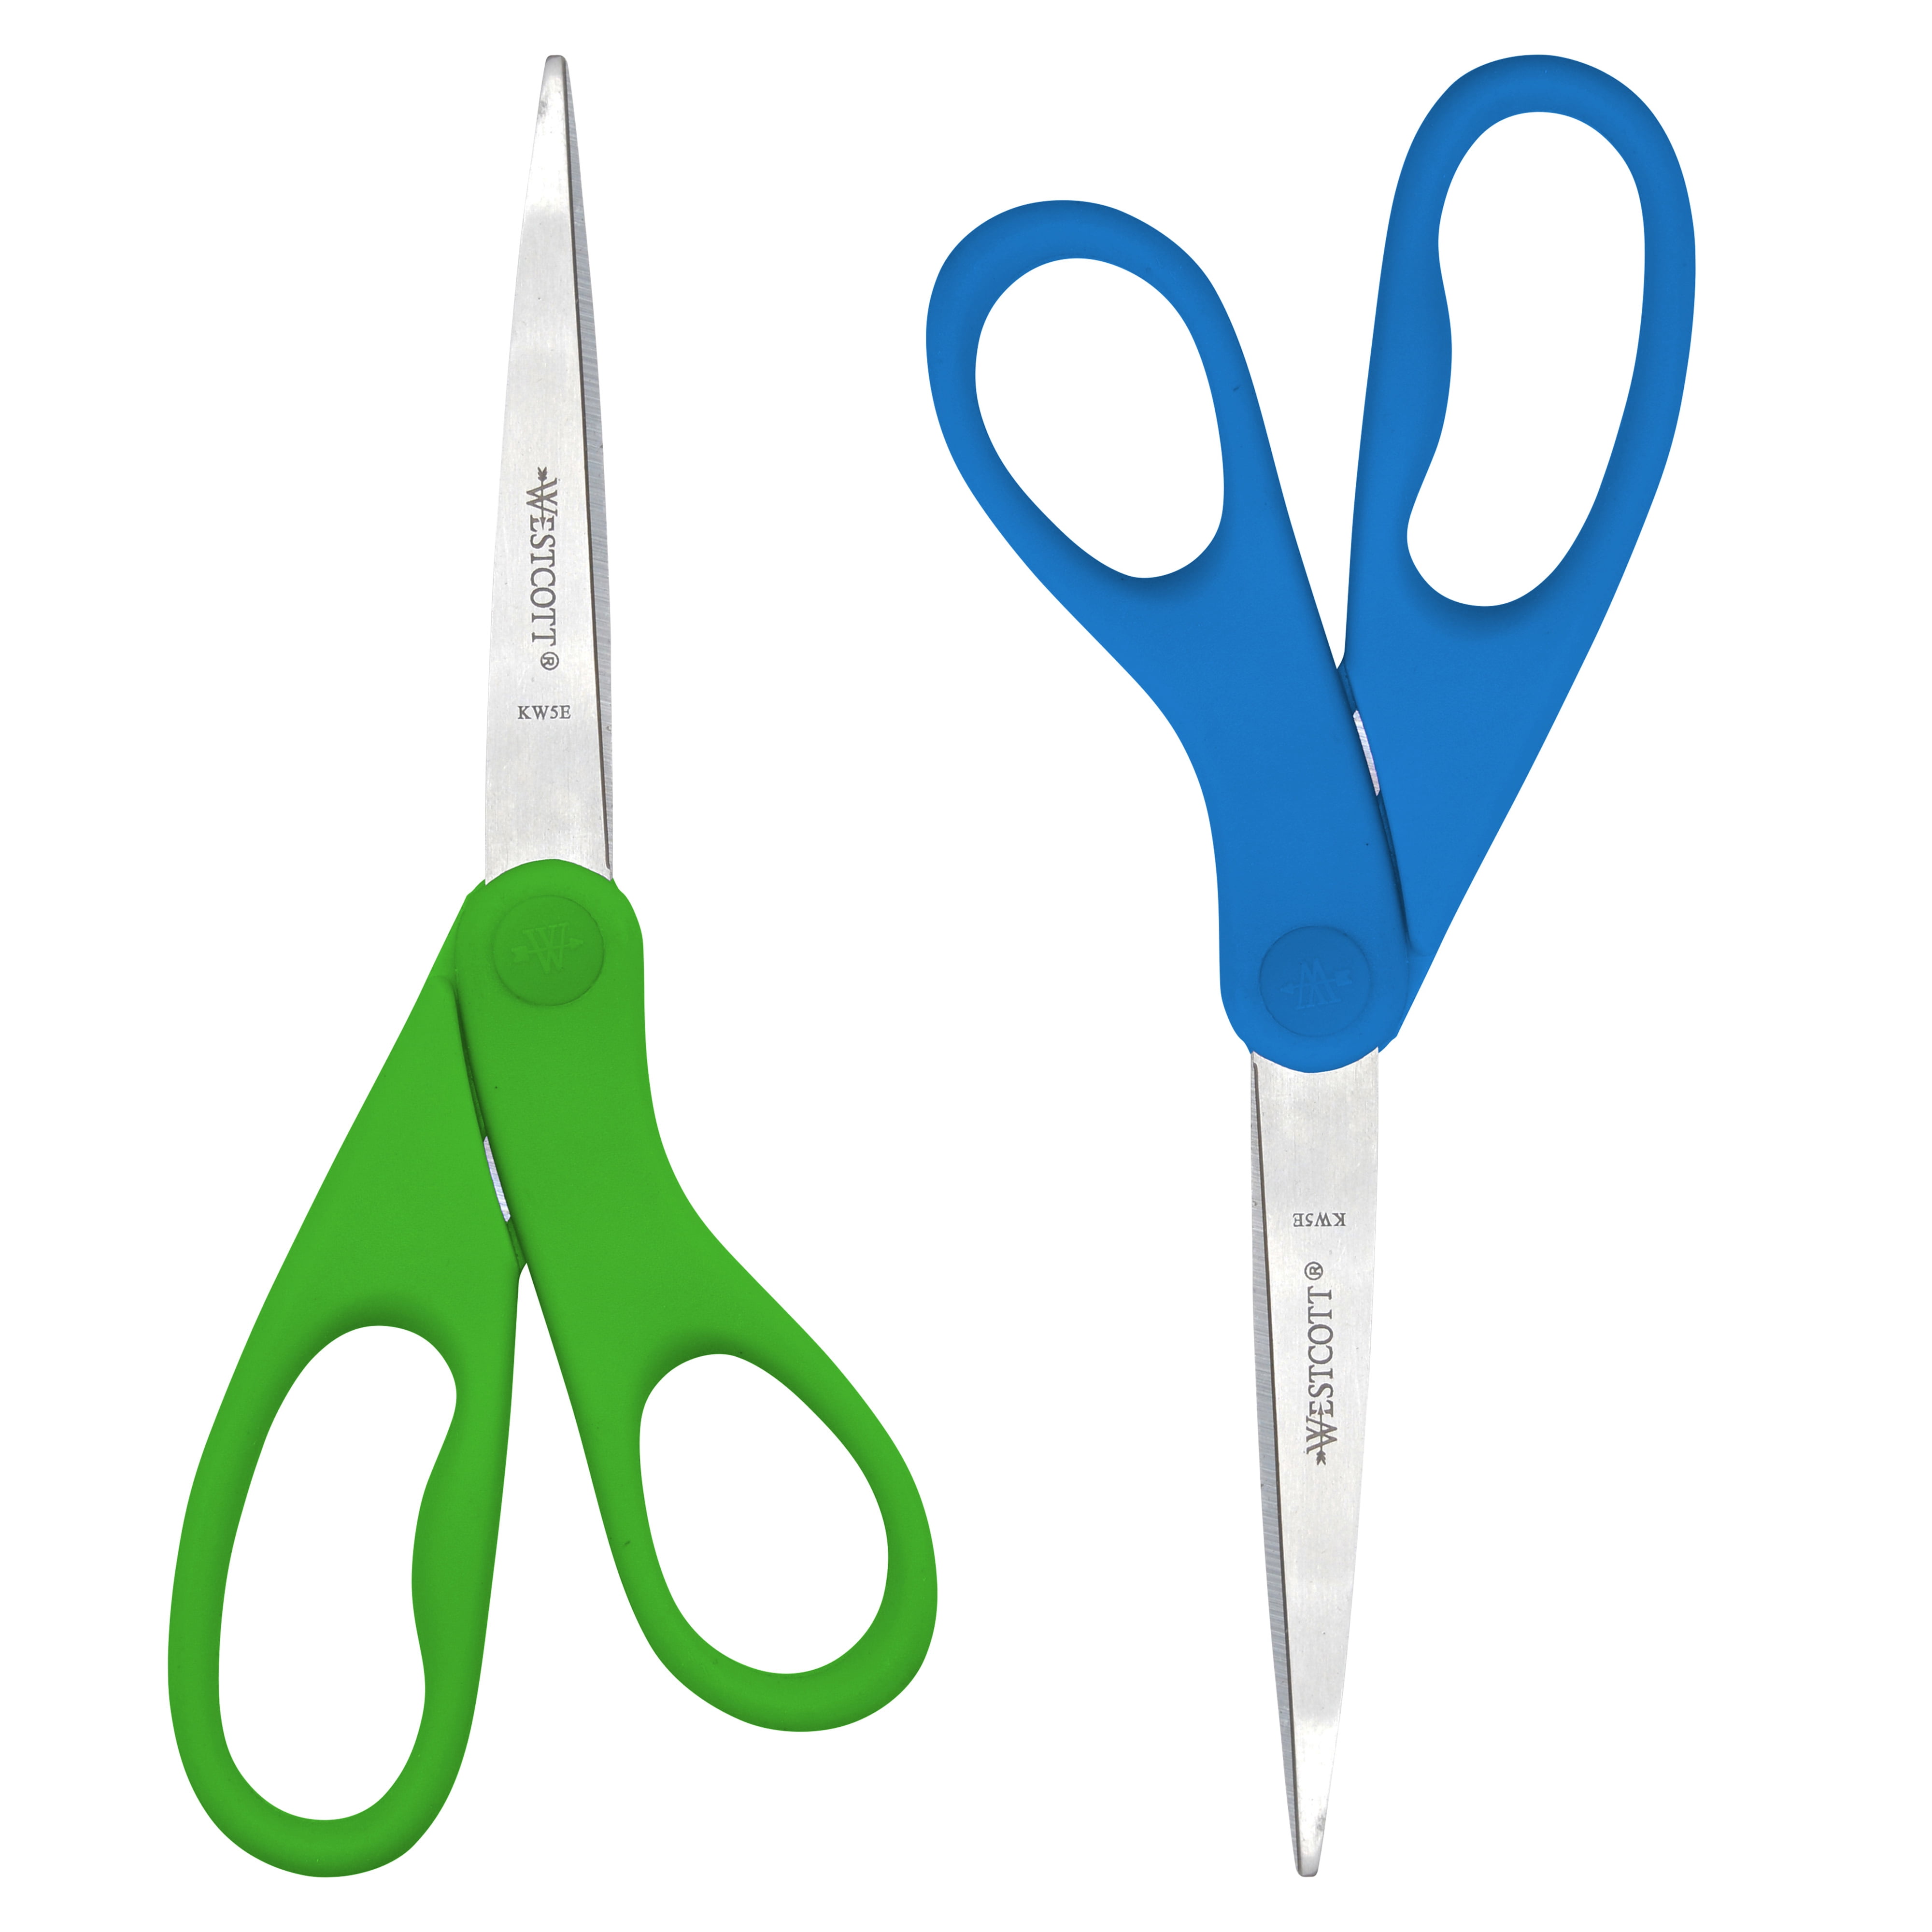  LIVINGO 3 Pack Sharp Scissors, 8.5 inch Comfort Grip Scissors  All Purpose for Office, Stainless Steel Shears for Home Heavy Duty Cutting  Fabric Sewing, Paper, School Crafting DIY : Arts